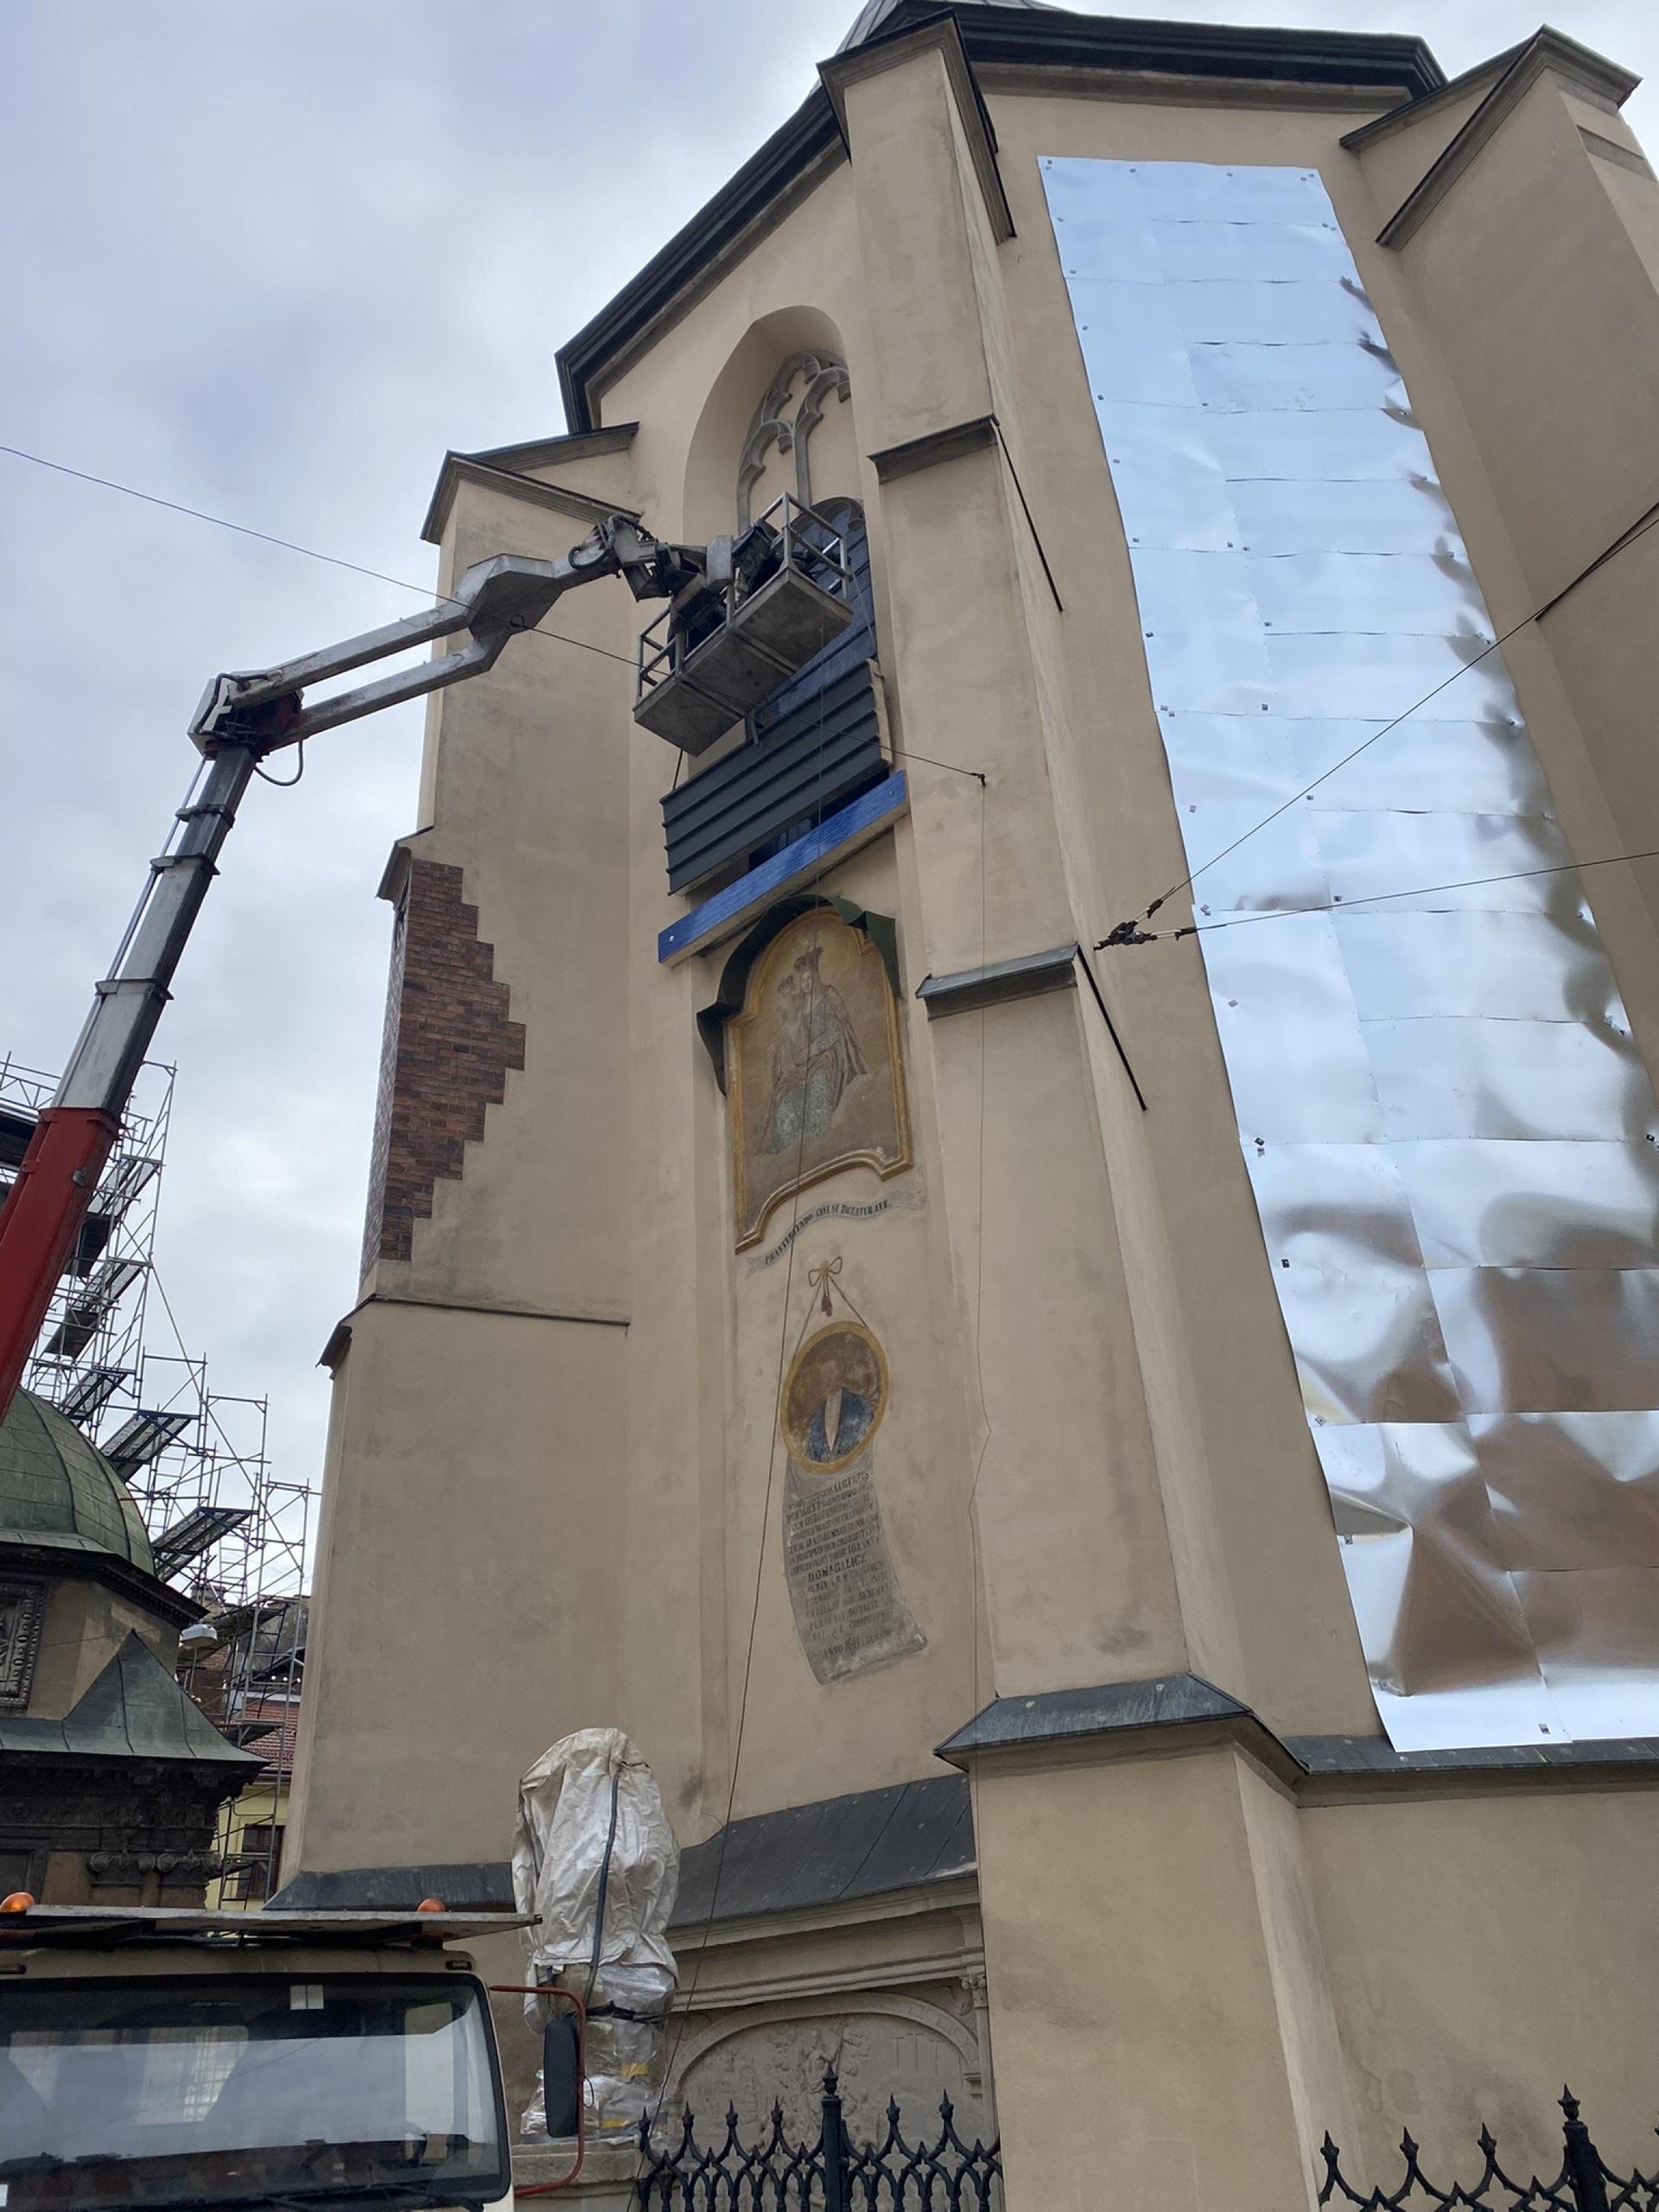 Workers install steel plates onto Lviv's 14th century central basilica to protect against potential Russian attack